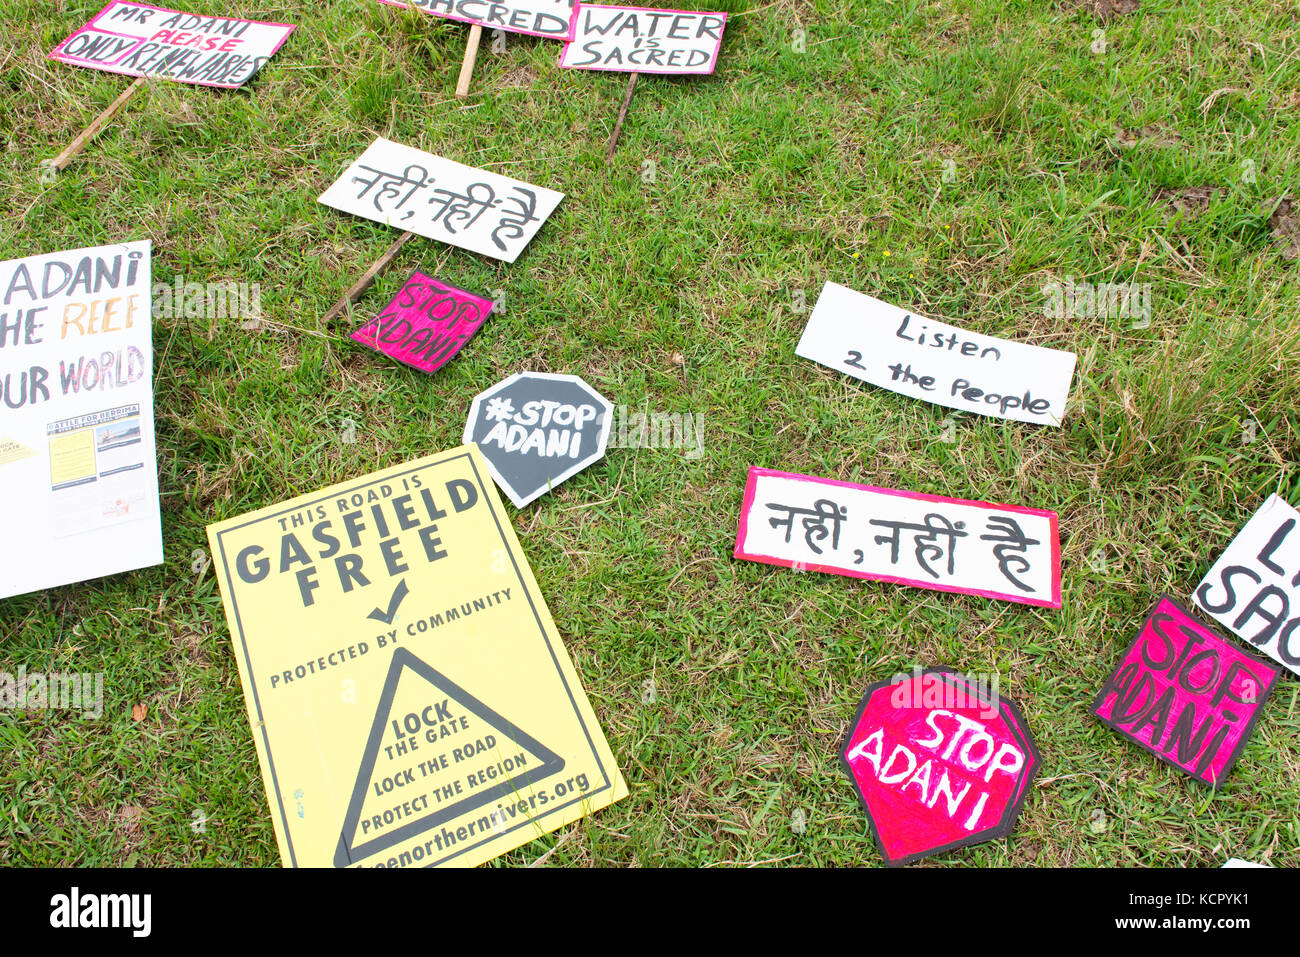 Nimbin, Australia. 7th October, 2017. Signs used at a protest against coal and Adani's Queensland Carmichael coal mine. Credit: Peter Ptschelinzew/Alamy Live News. Stock Photo